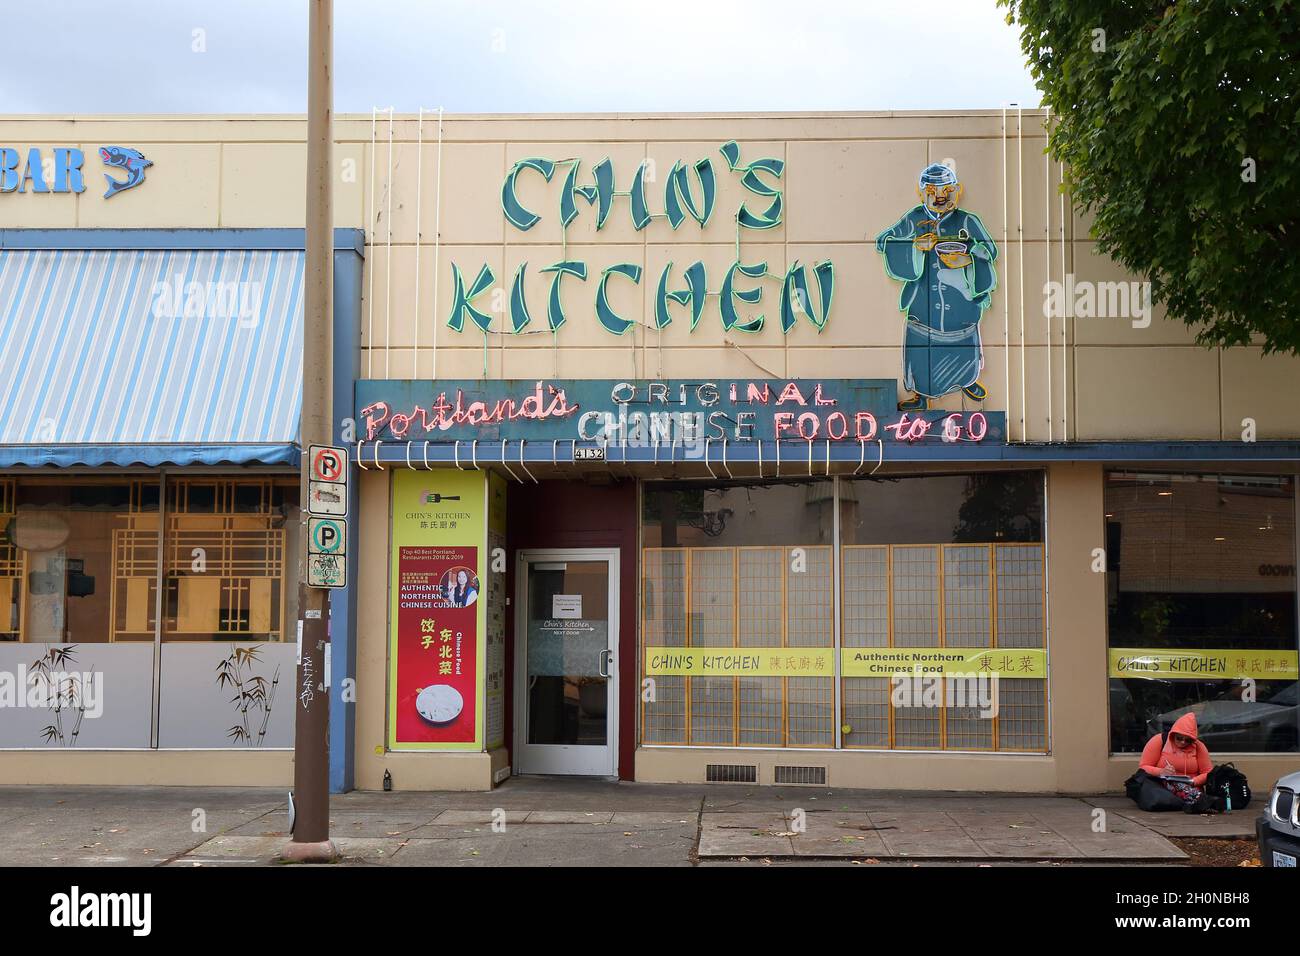 Chin's kitchen, 4126 NE Broadway, Portland, Oregon. exterior storefront and neon sign of a Chinese restaurant in the Hollywood neighborhood. Stock Photo